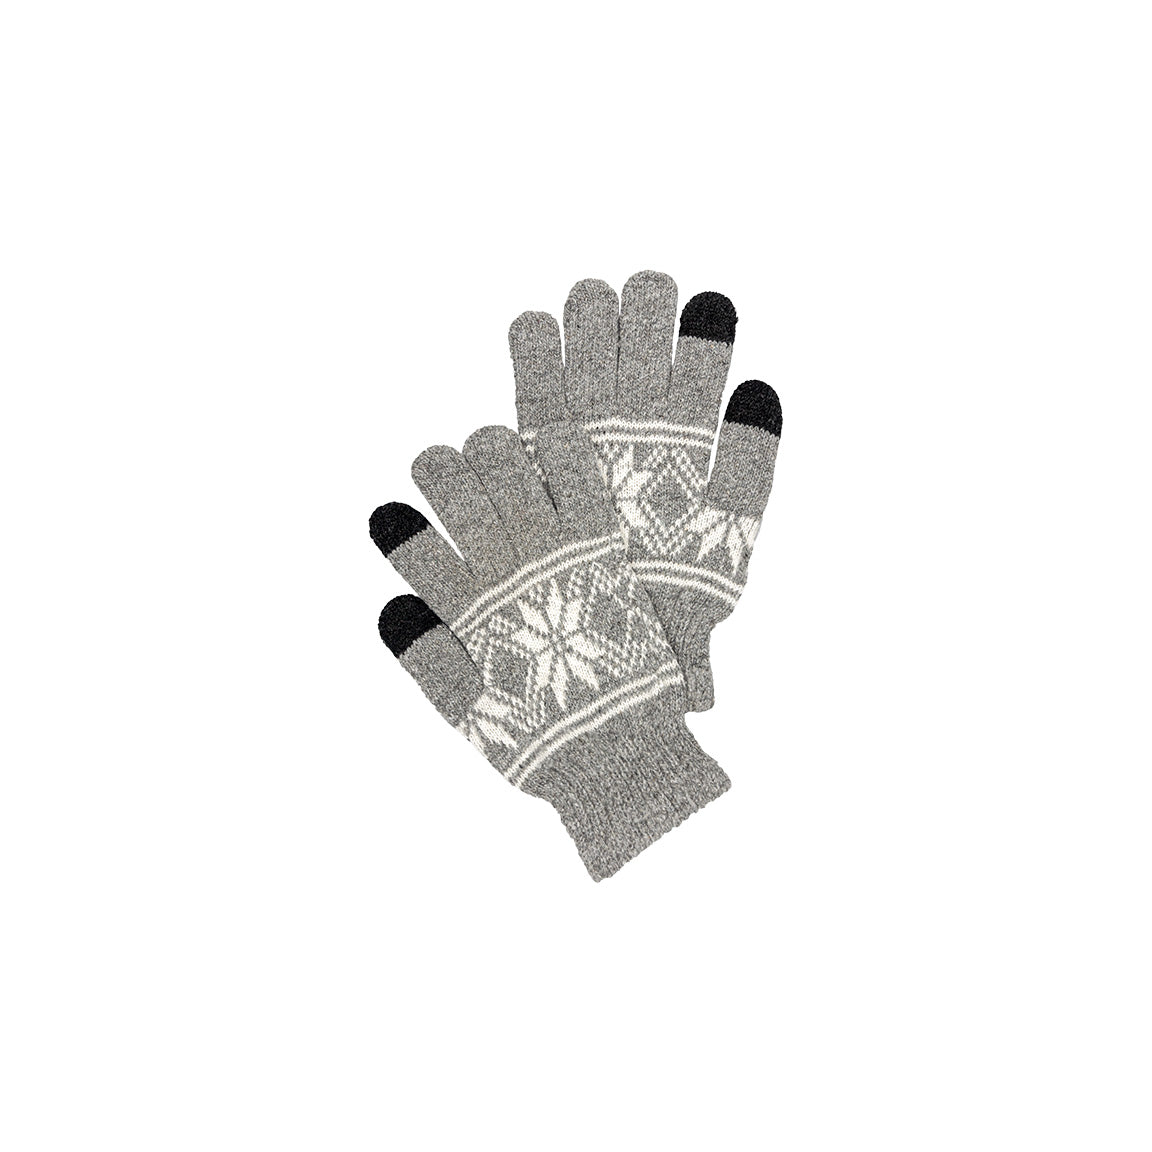 Gray gloves with a white snowflake pattern and black touch screen capable tips on the thumb, index, and middle fingers.